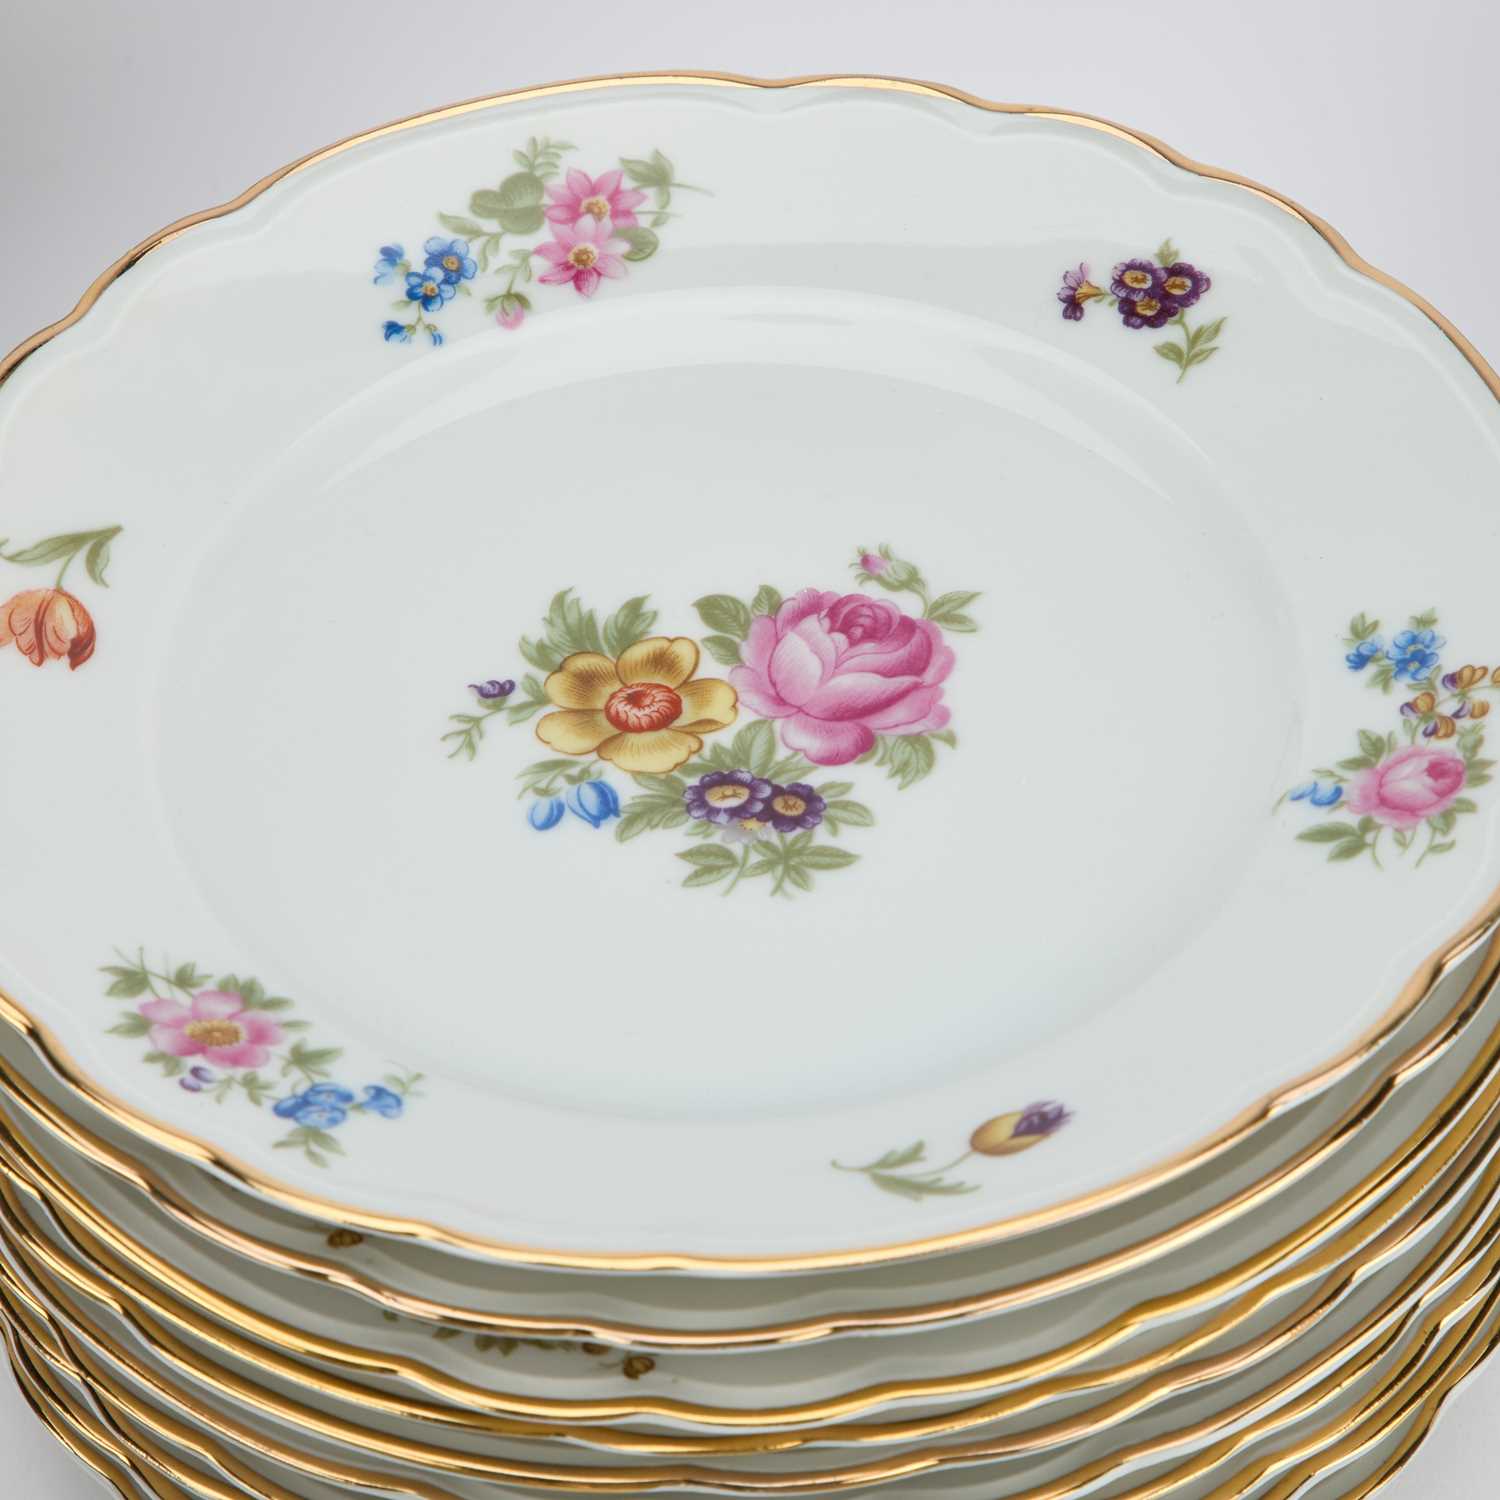 RICHARD GINORI (ITALY), A VERY RARE FLORAL PATTERN DINNER SERVICE - Image 3 of 5